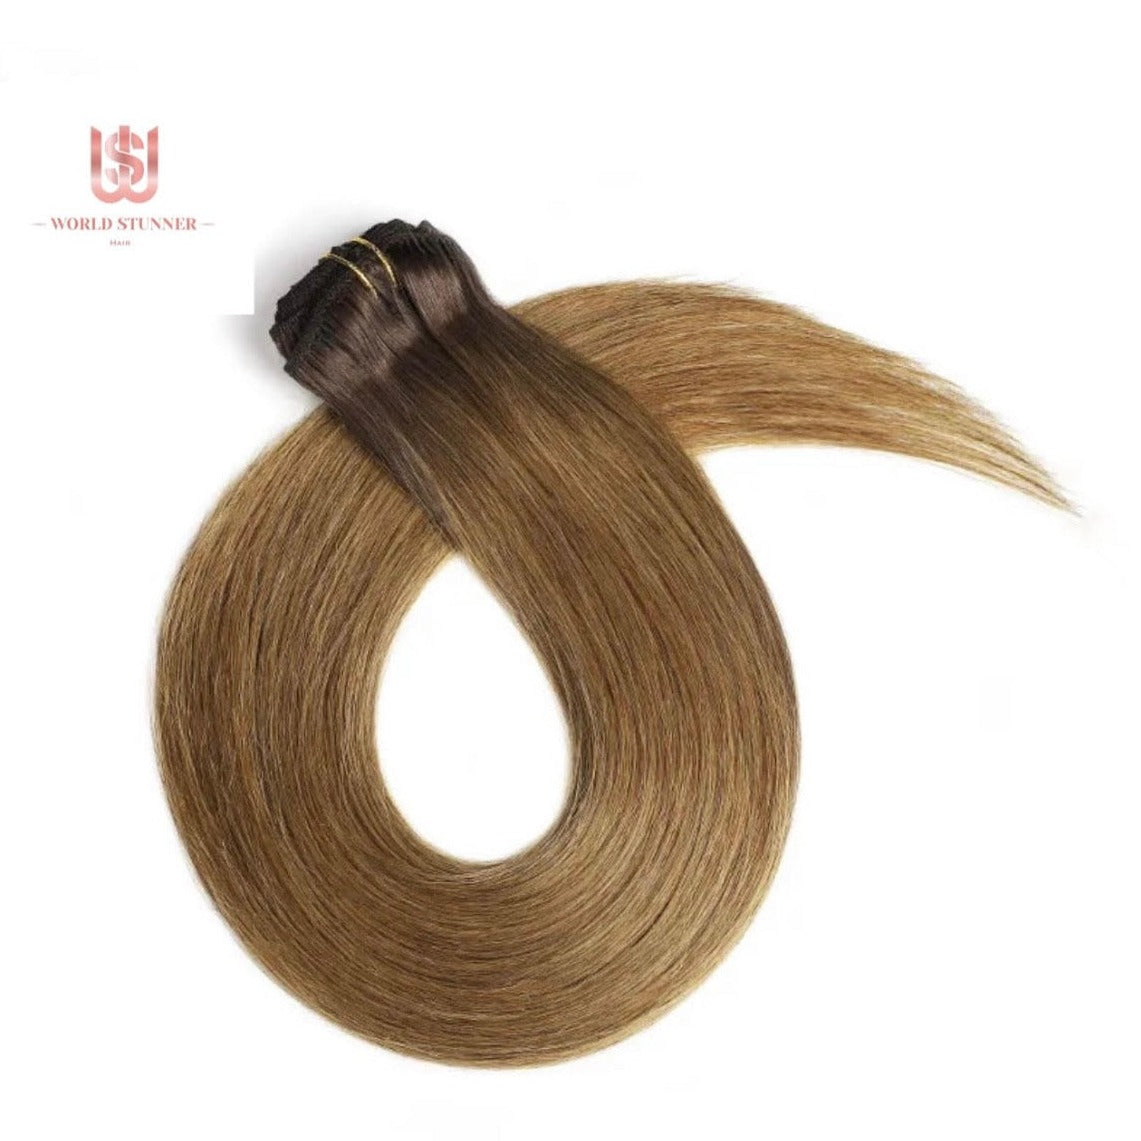 4T12A - SUPER THICK 22” 7 PIECE STRAIGHT CLIPS IN HAIR EXTENSIONS